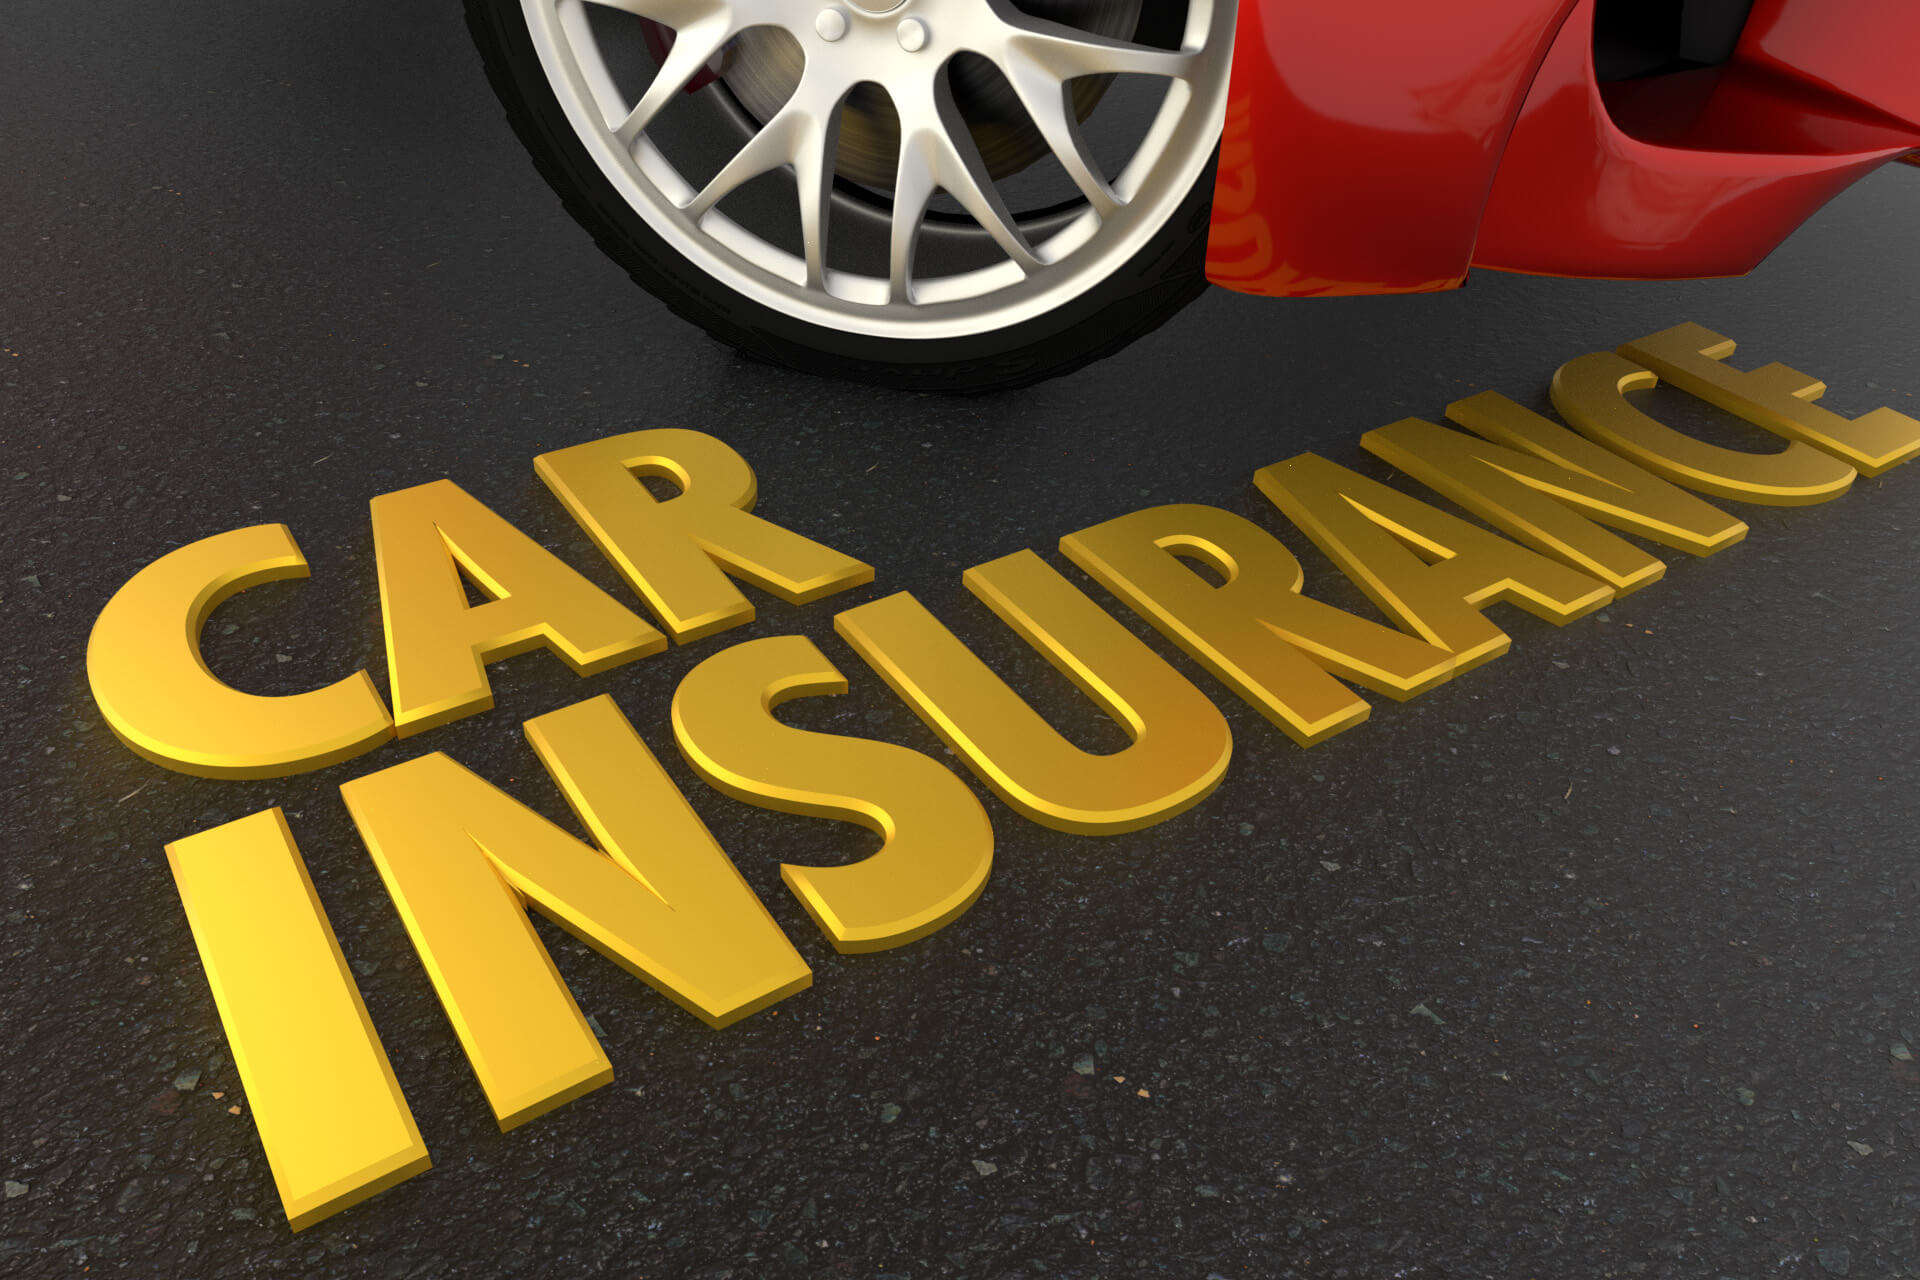 Car insurance text free image download